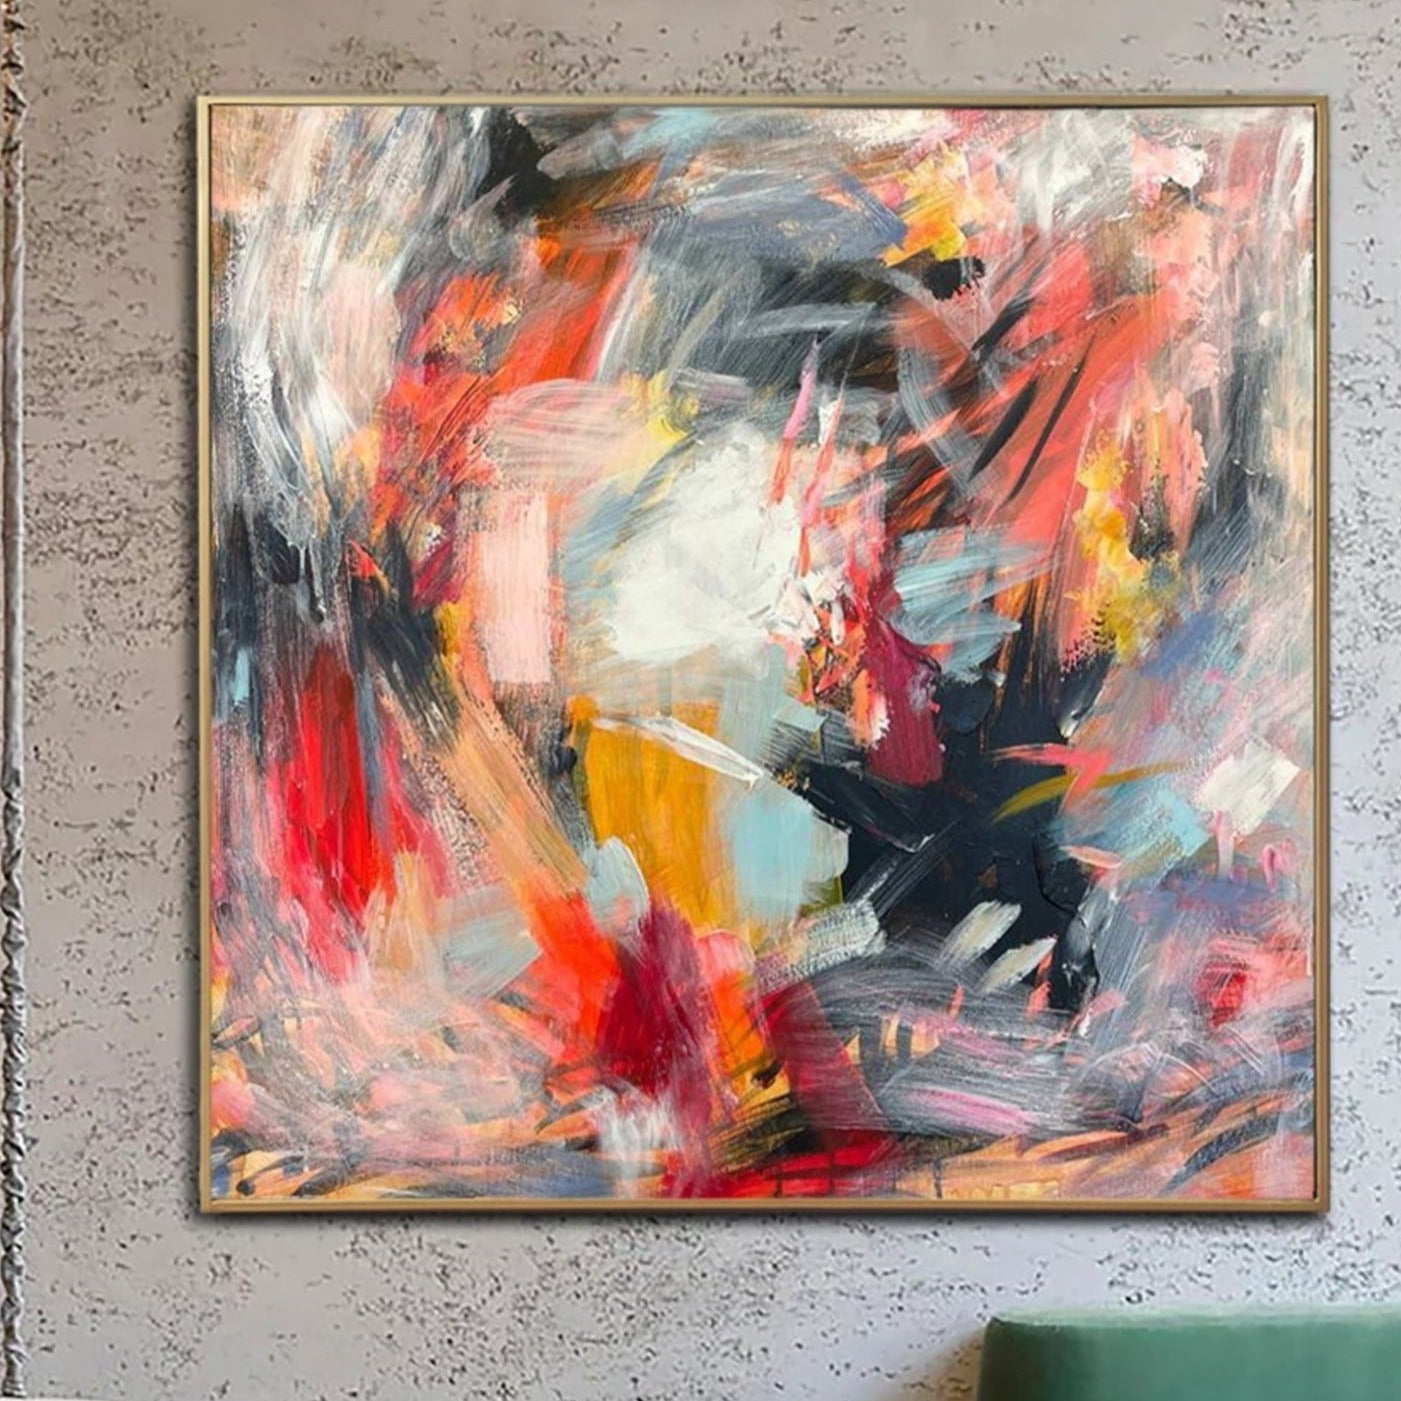 Large Original Abstract Oil Painting Smoking Woman Wall Art On Canvas